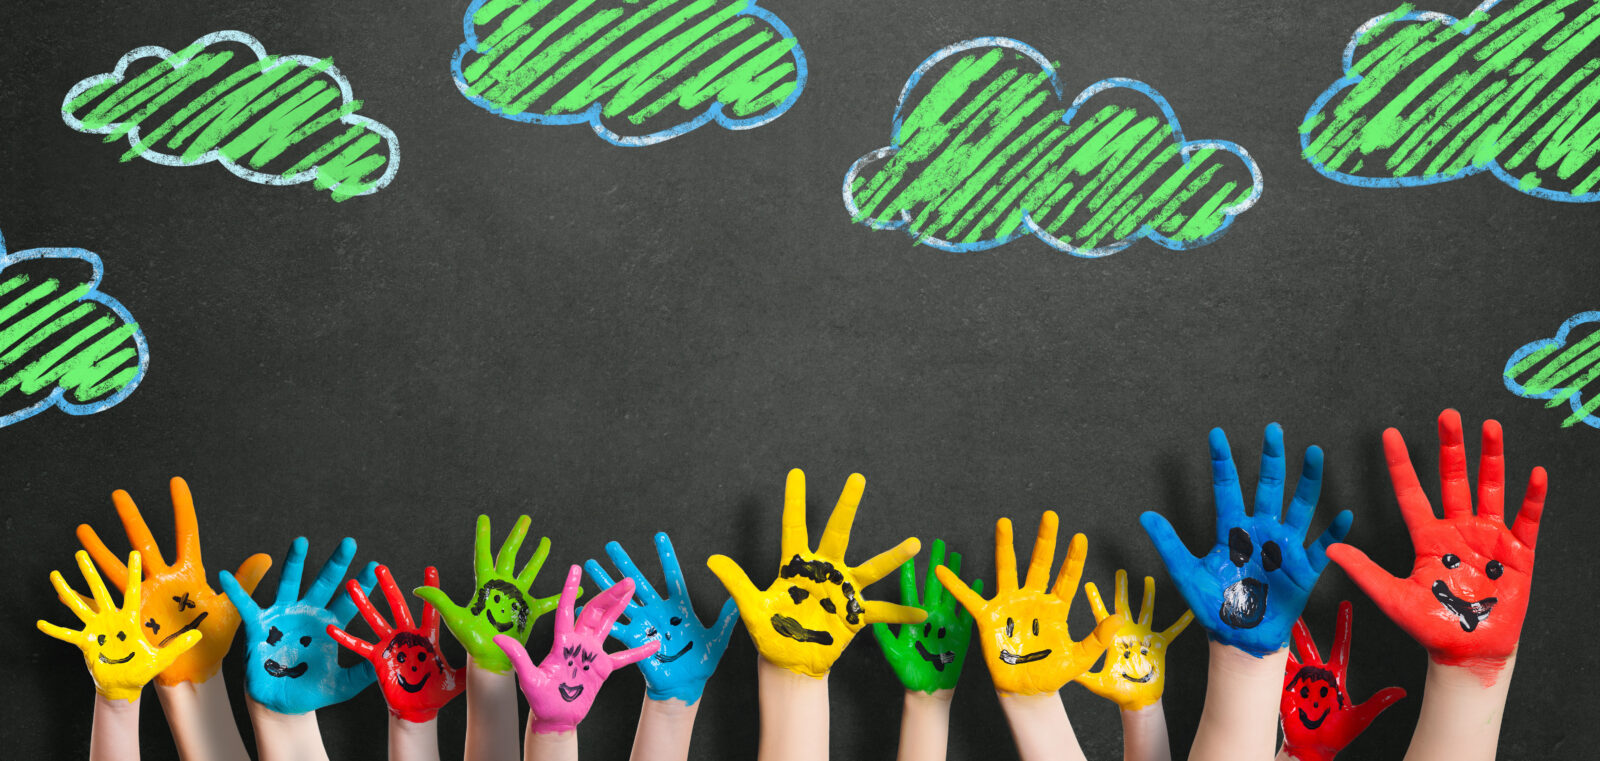 Children's hands painted all different colors with faces painted on in black. Against a black board with green clouds drawn above the children's hands.